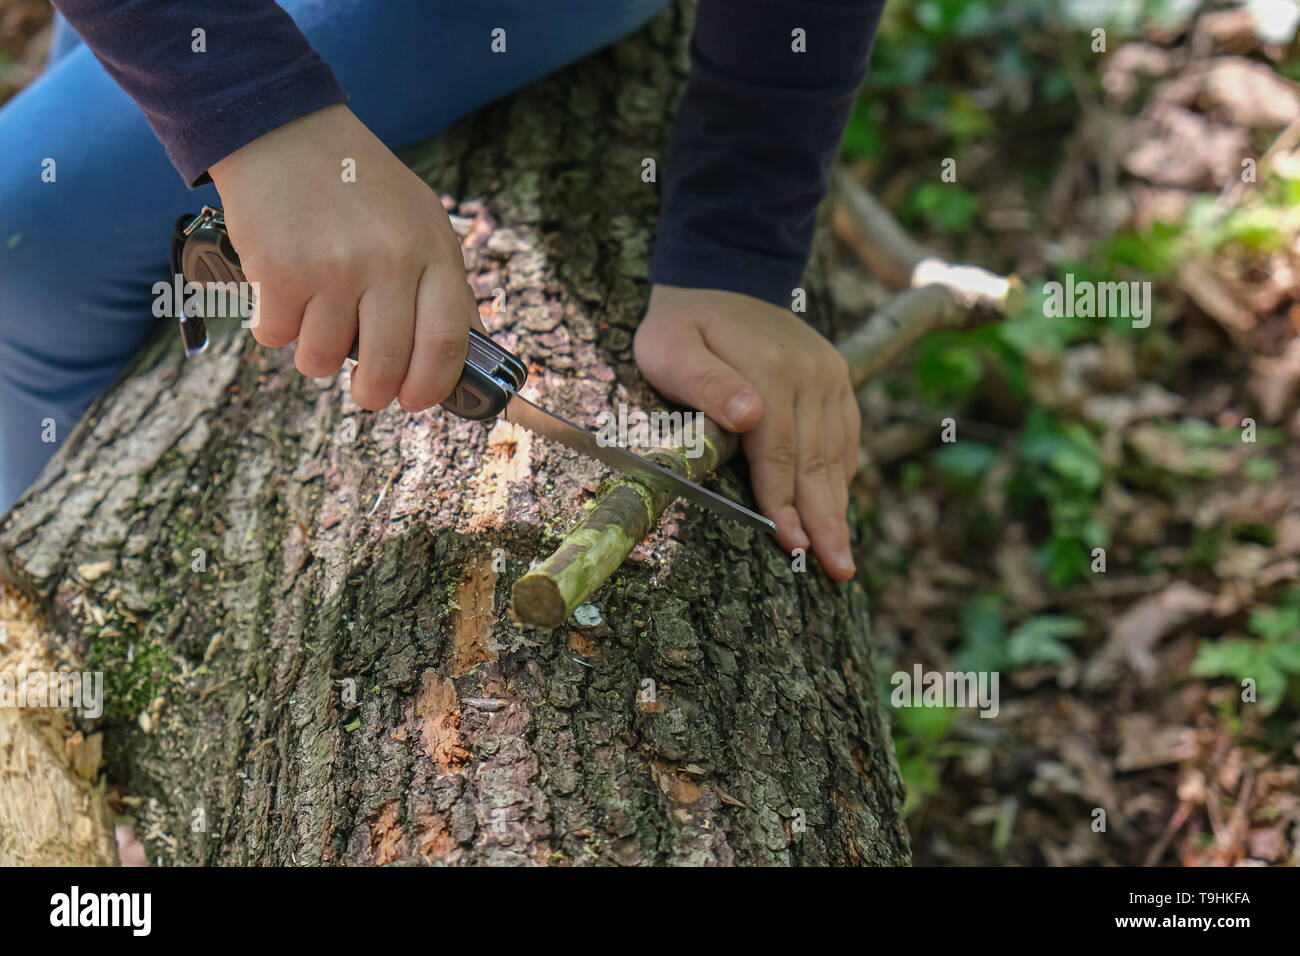 Hands of little girl or boy using a Swiss knife, sawing a piece of wood in the forest, outdoor survival and camping, fun in the woods, nobody Stock Photo